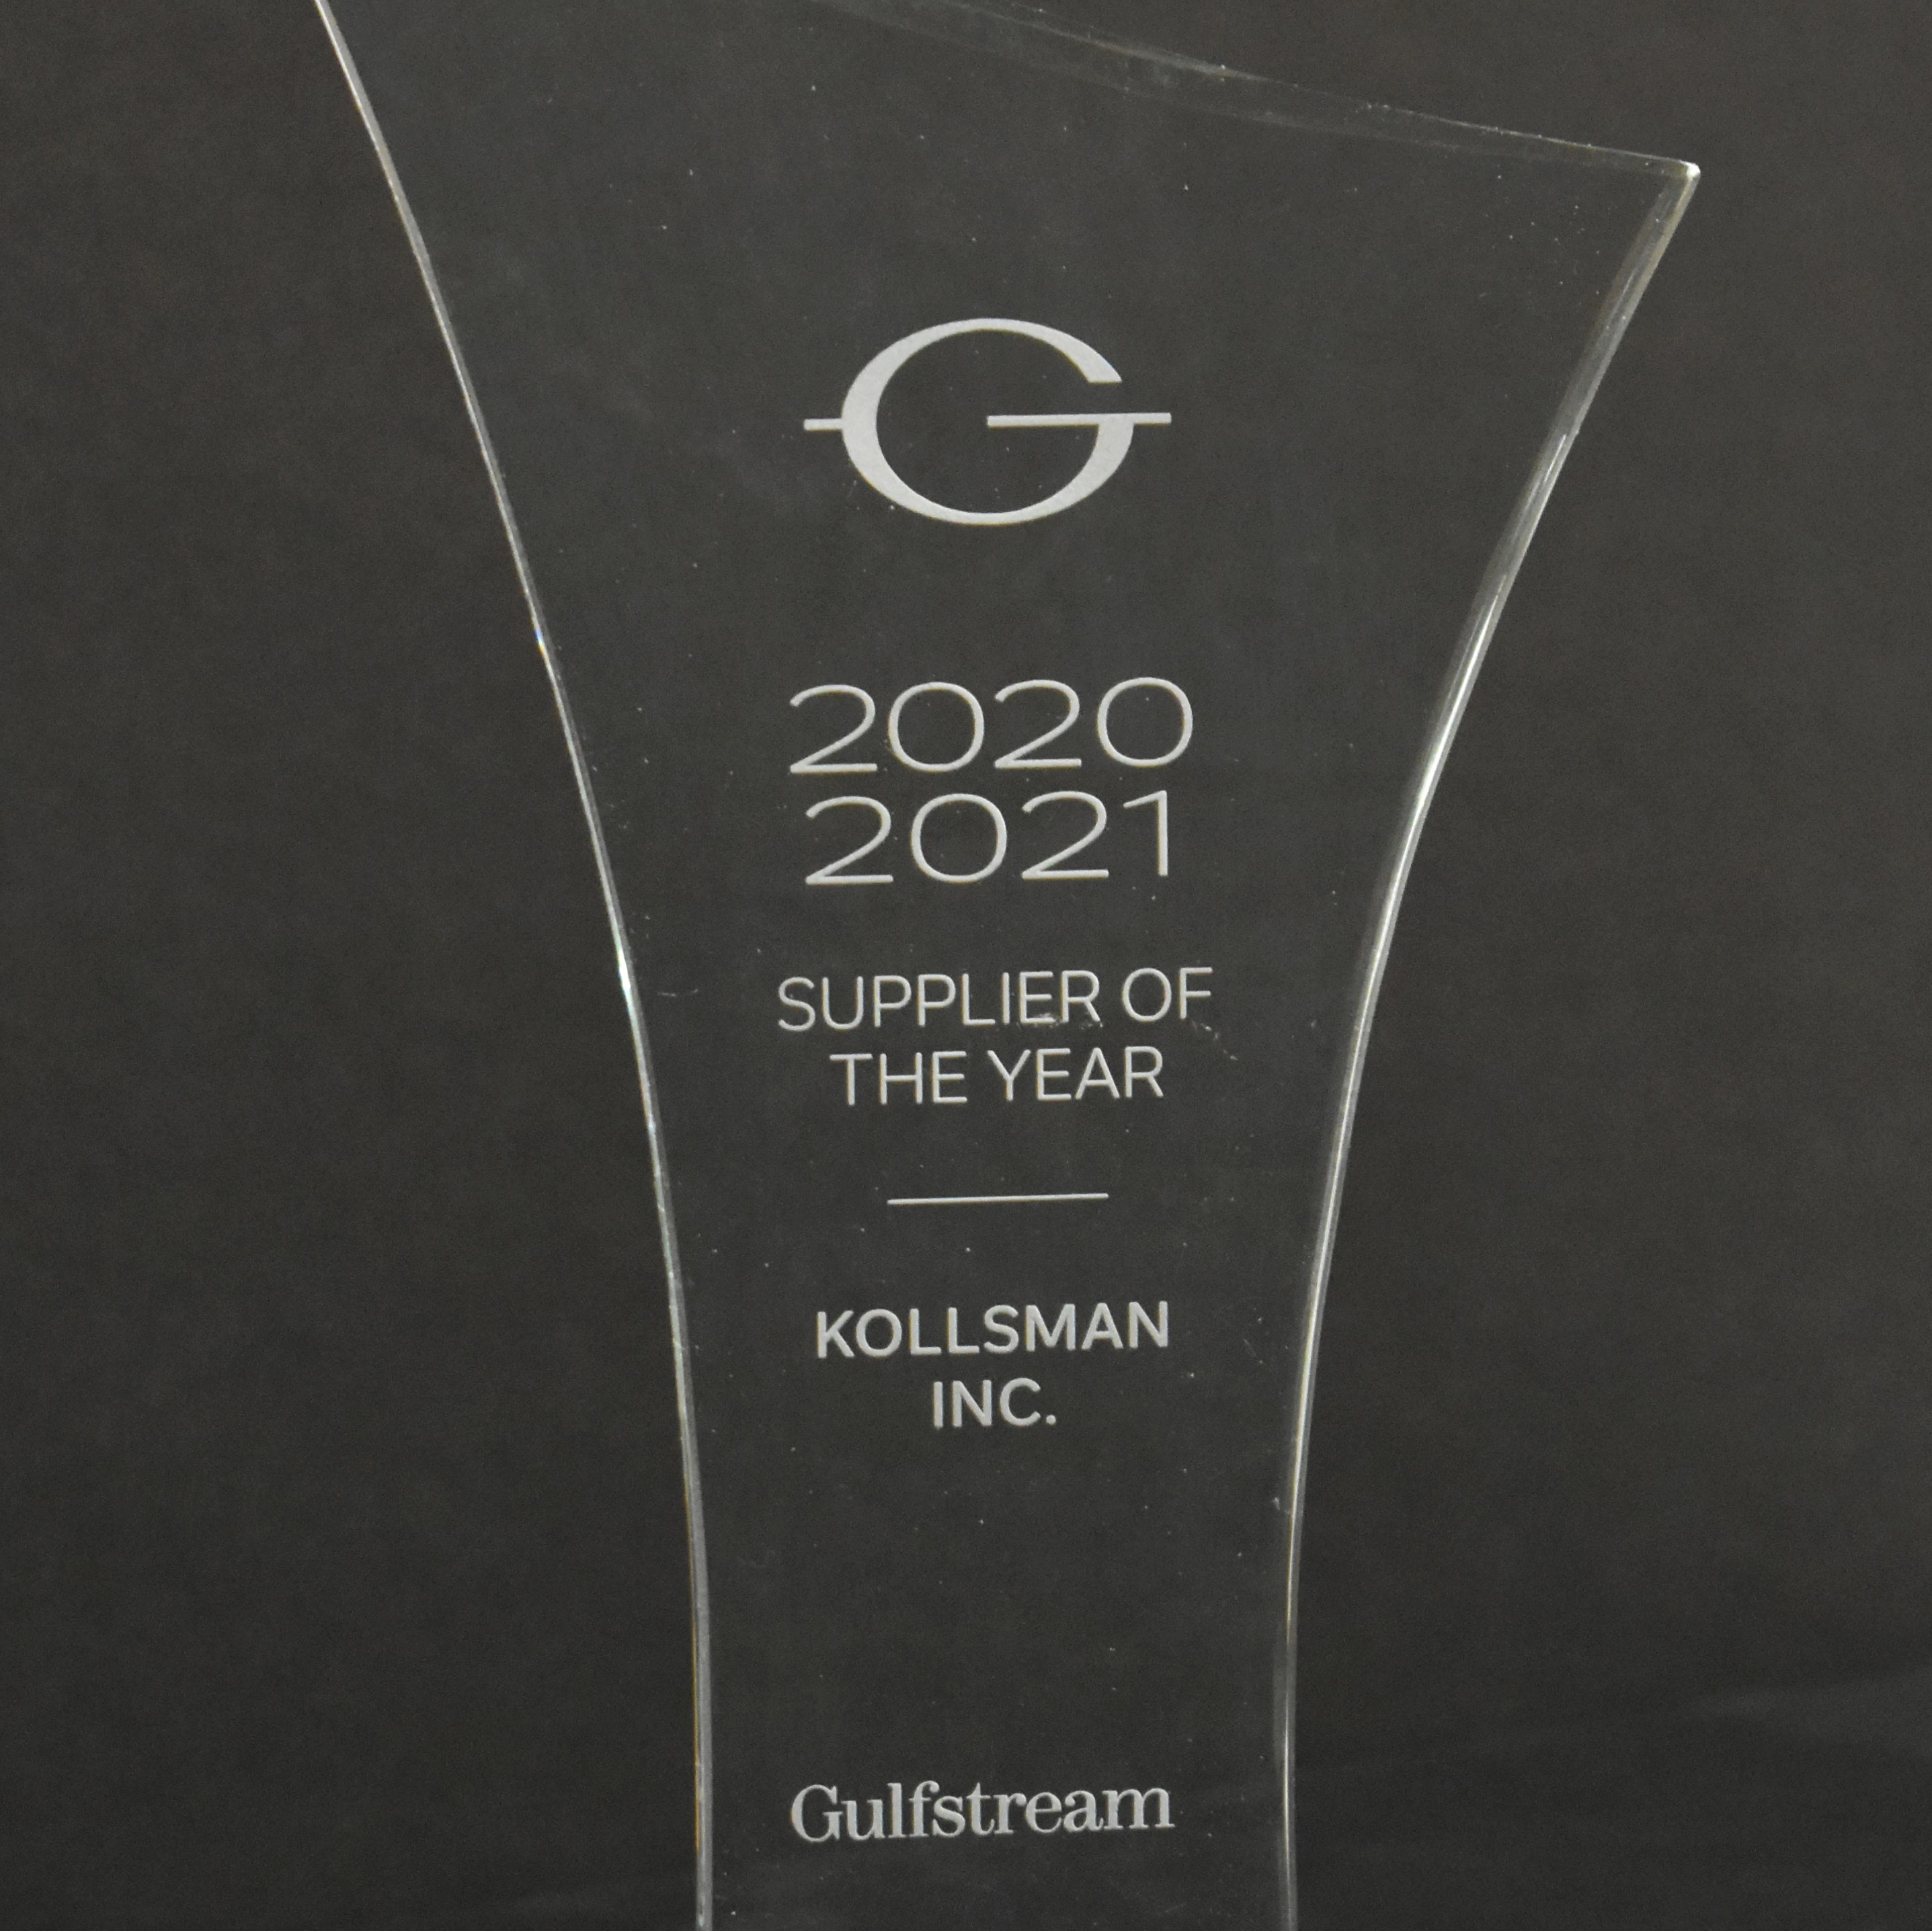 KOLLSMAN, ELBIT SYSTEMS OF AMERICA SUBSIDIARY, HONORED WITH SUPPLIER OF THE YEAR AWARD